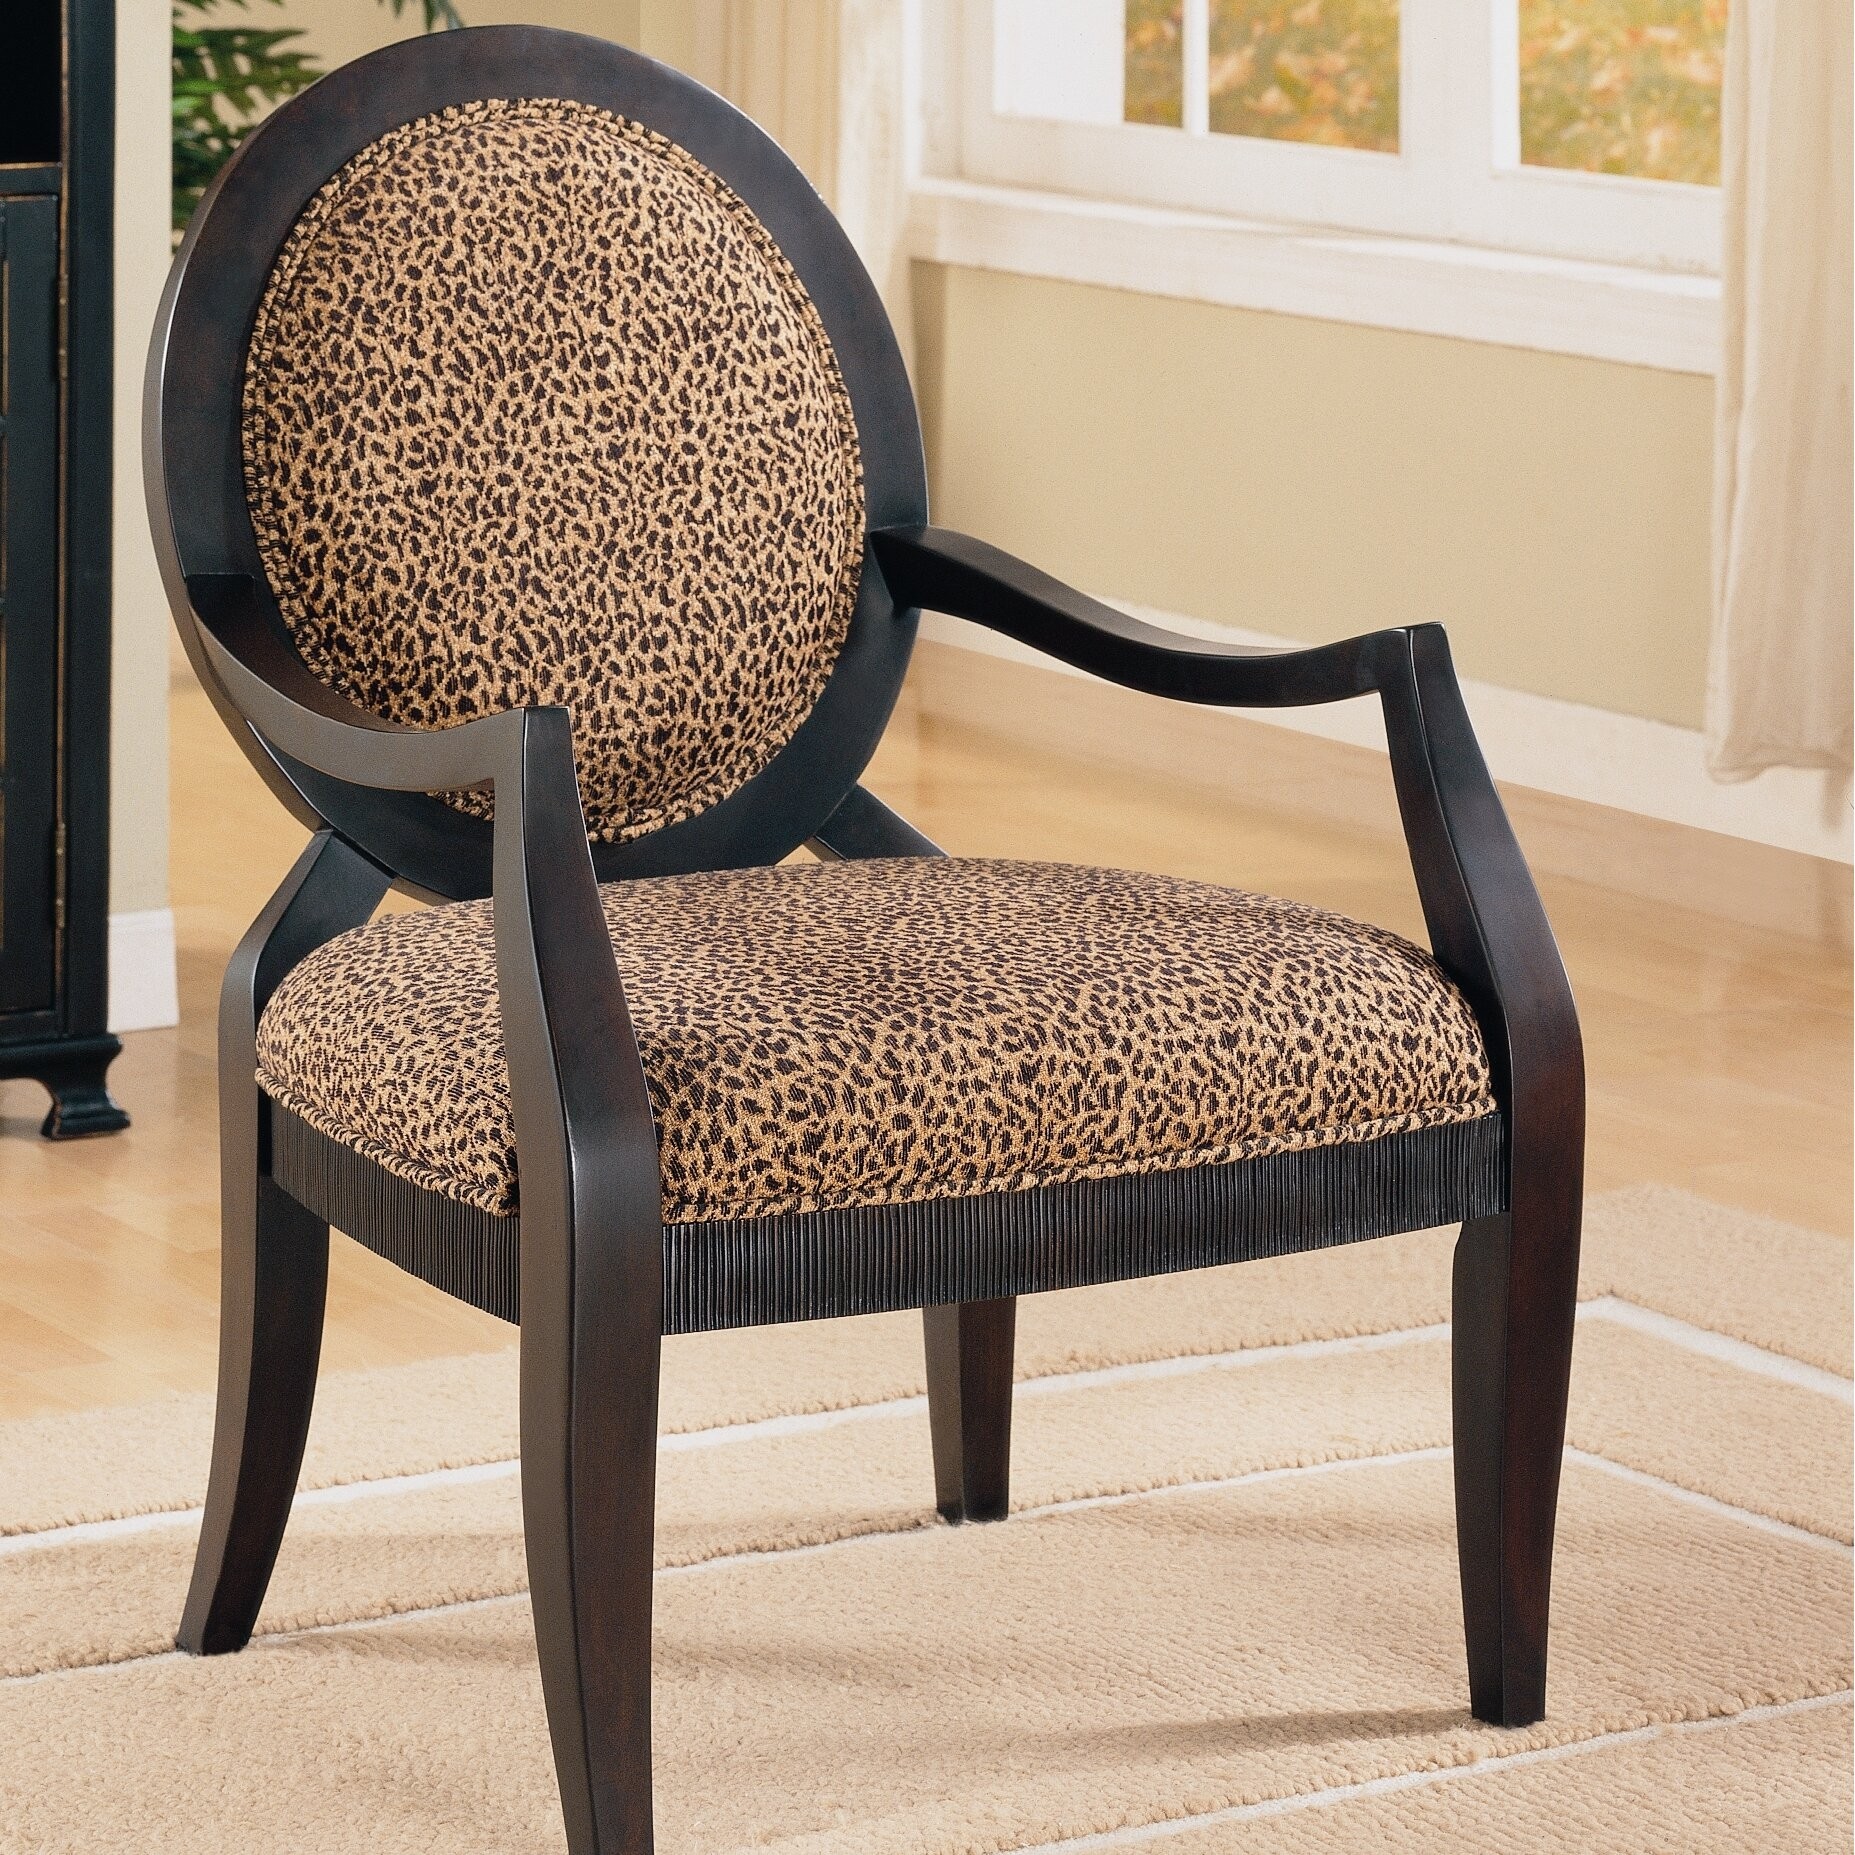 Grenoble Arm Chair Espresso Contemporary Wooden High Backed Armchairs Home Furniture Decor Ideal for Living and Dining Room Seating,Leopard print fabric upholstery with an oval back features,hand-carved details seat frame - Made from solid hardwood